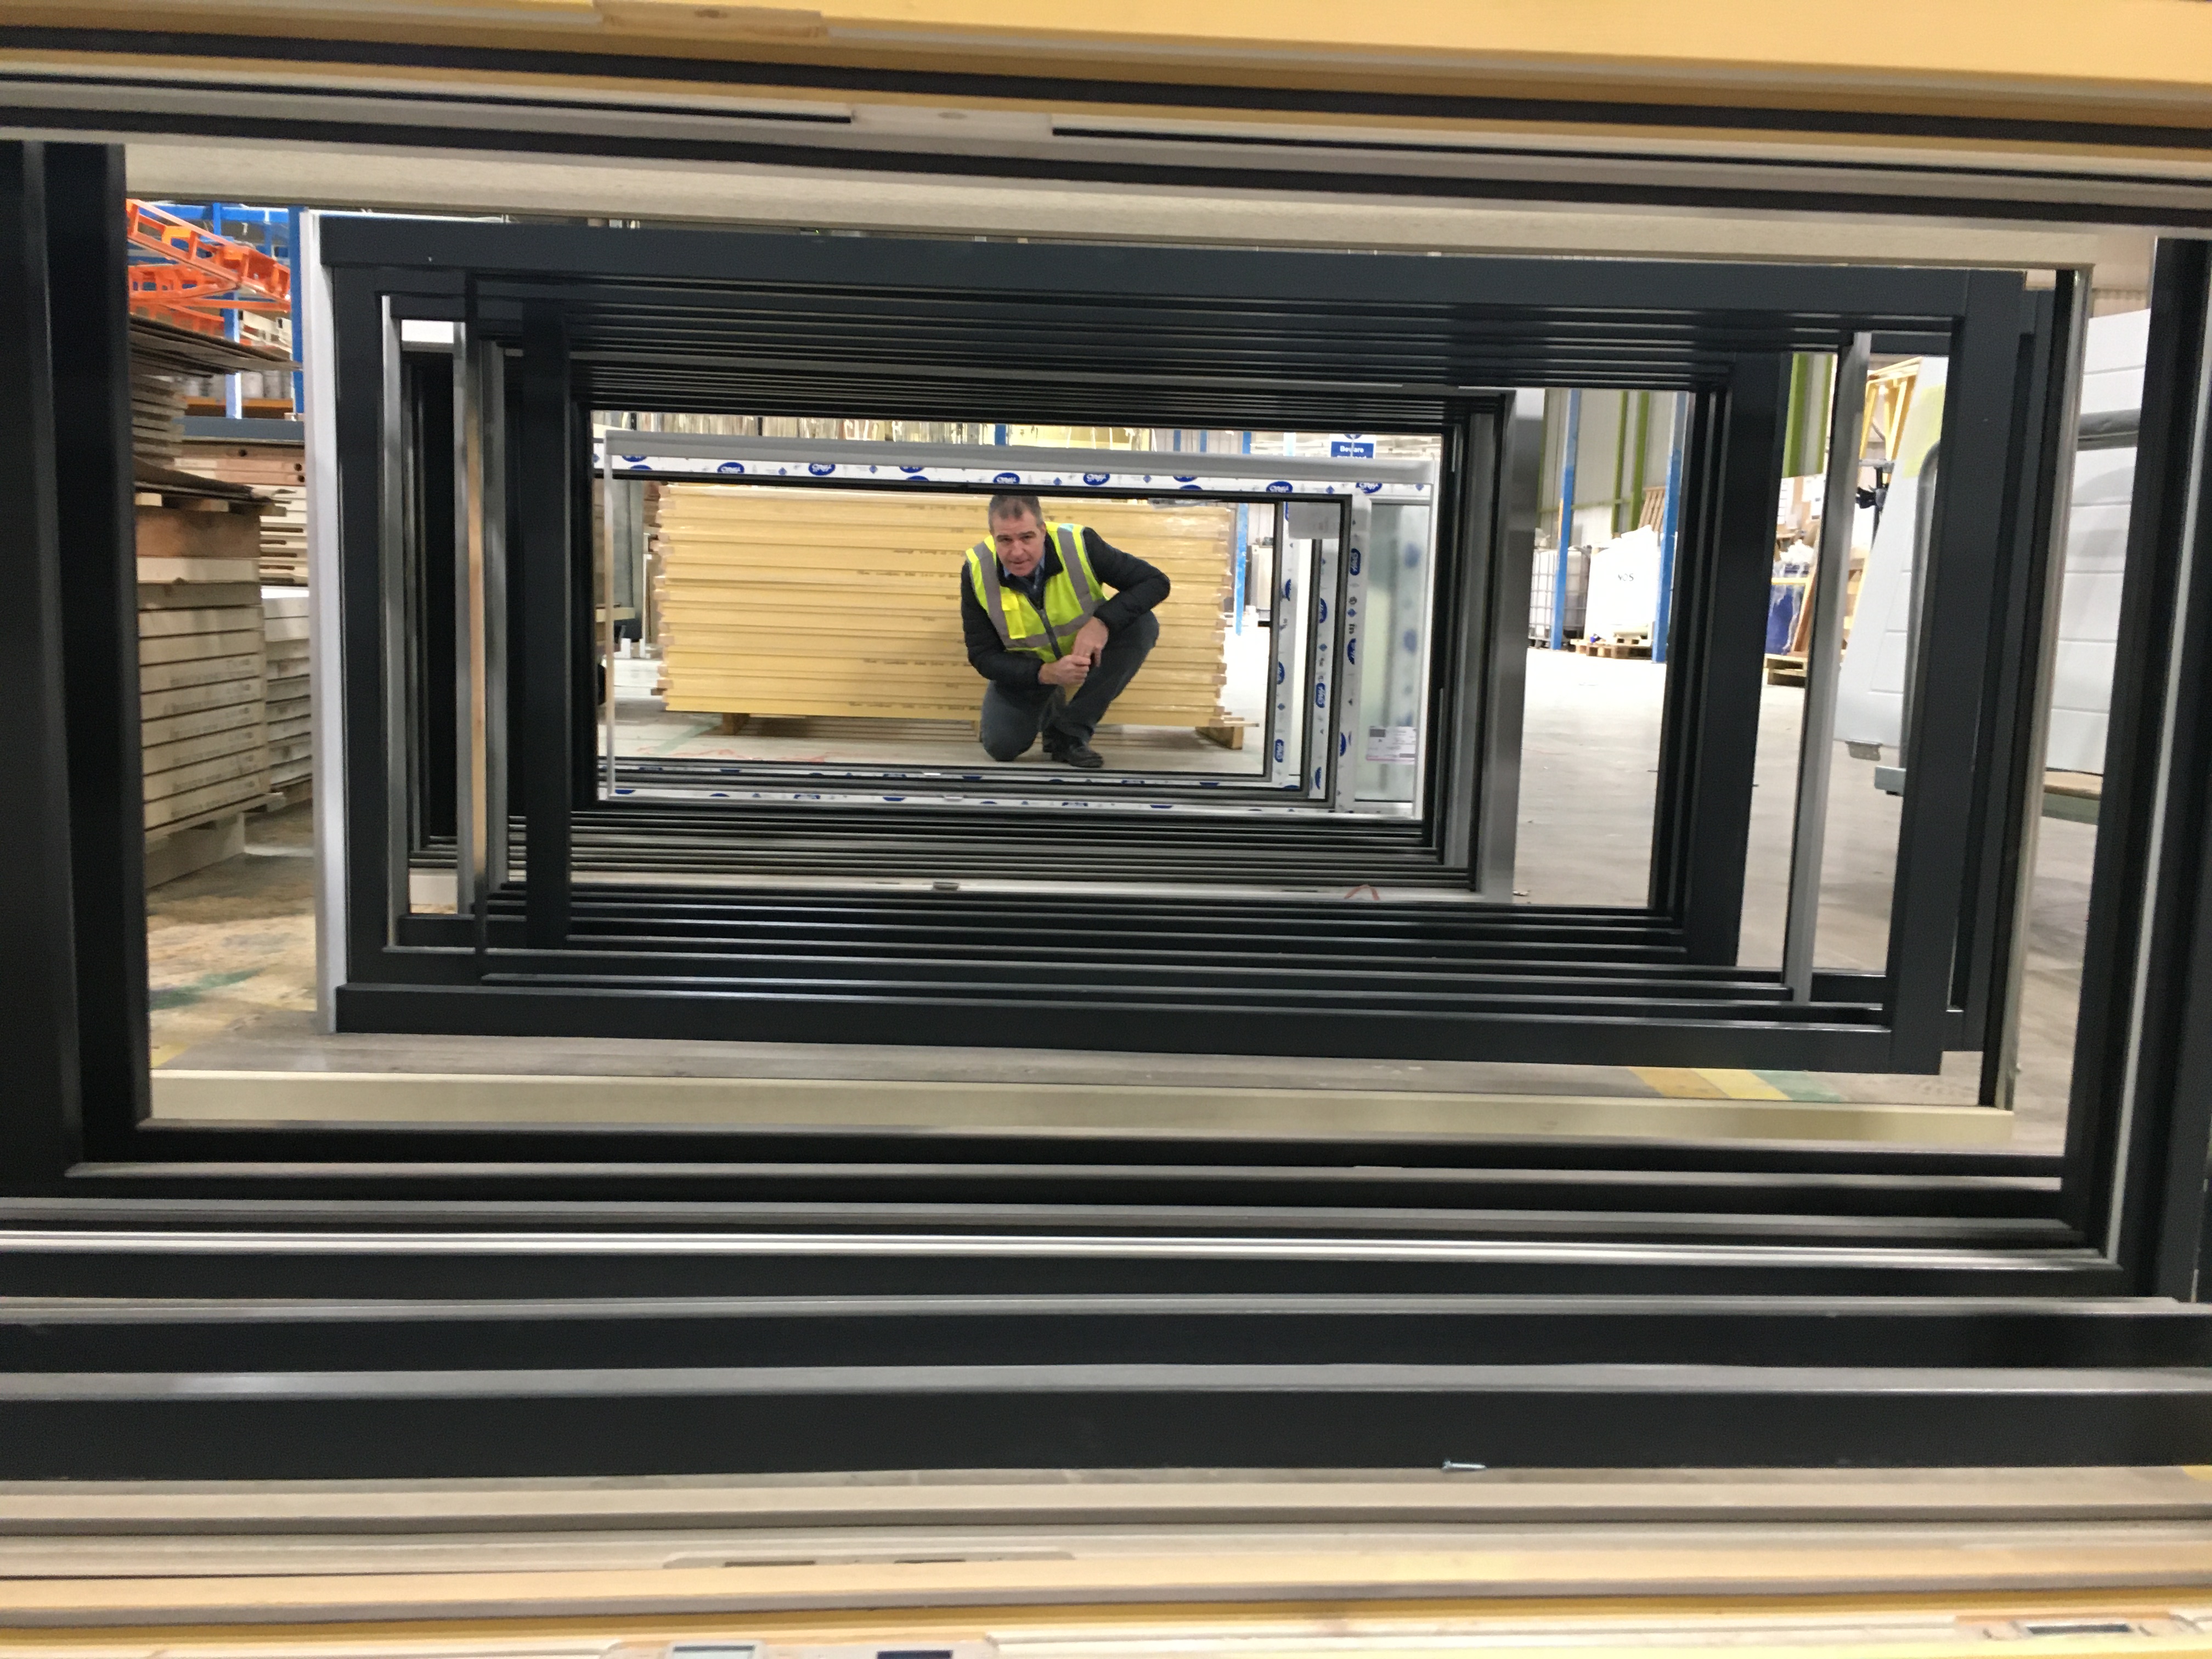 Image: Fire door manufacturer to expand into new sectors